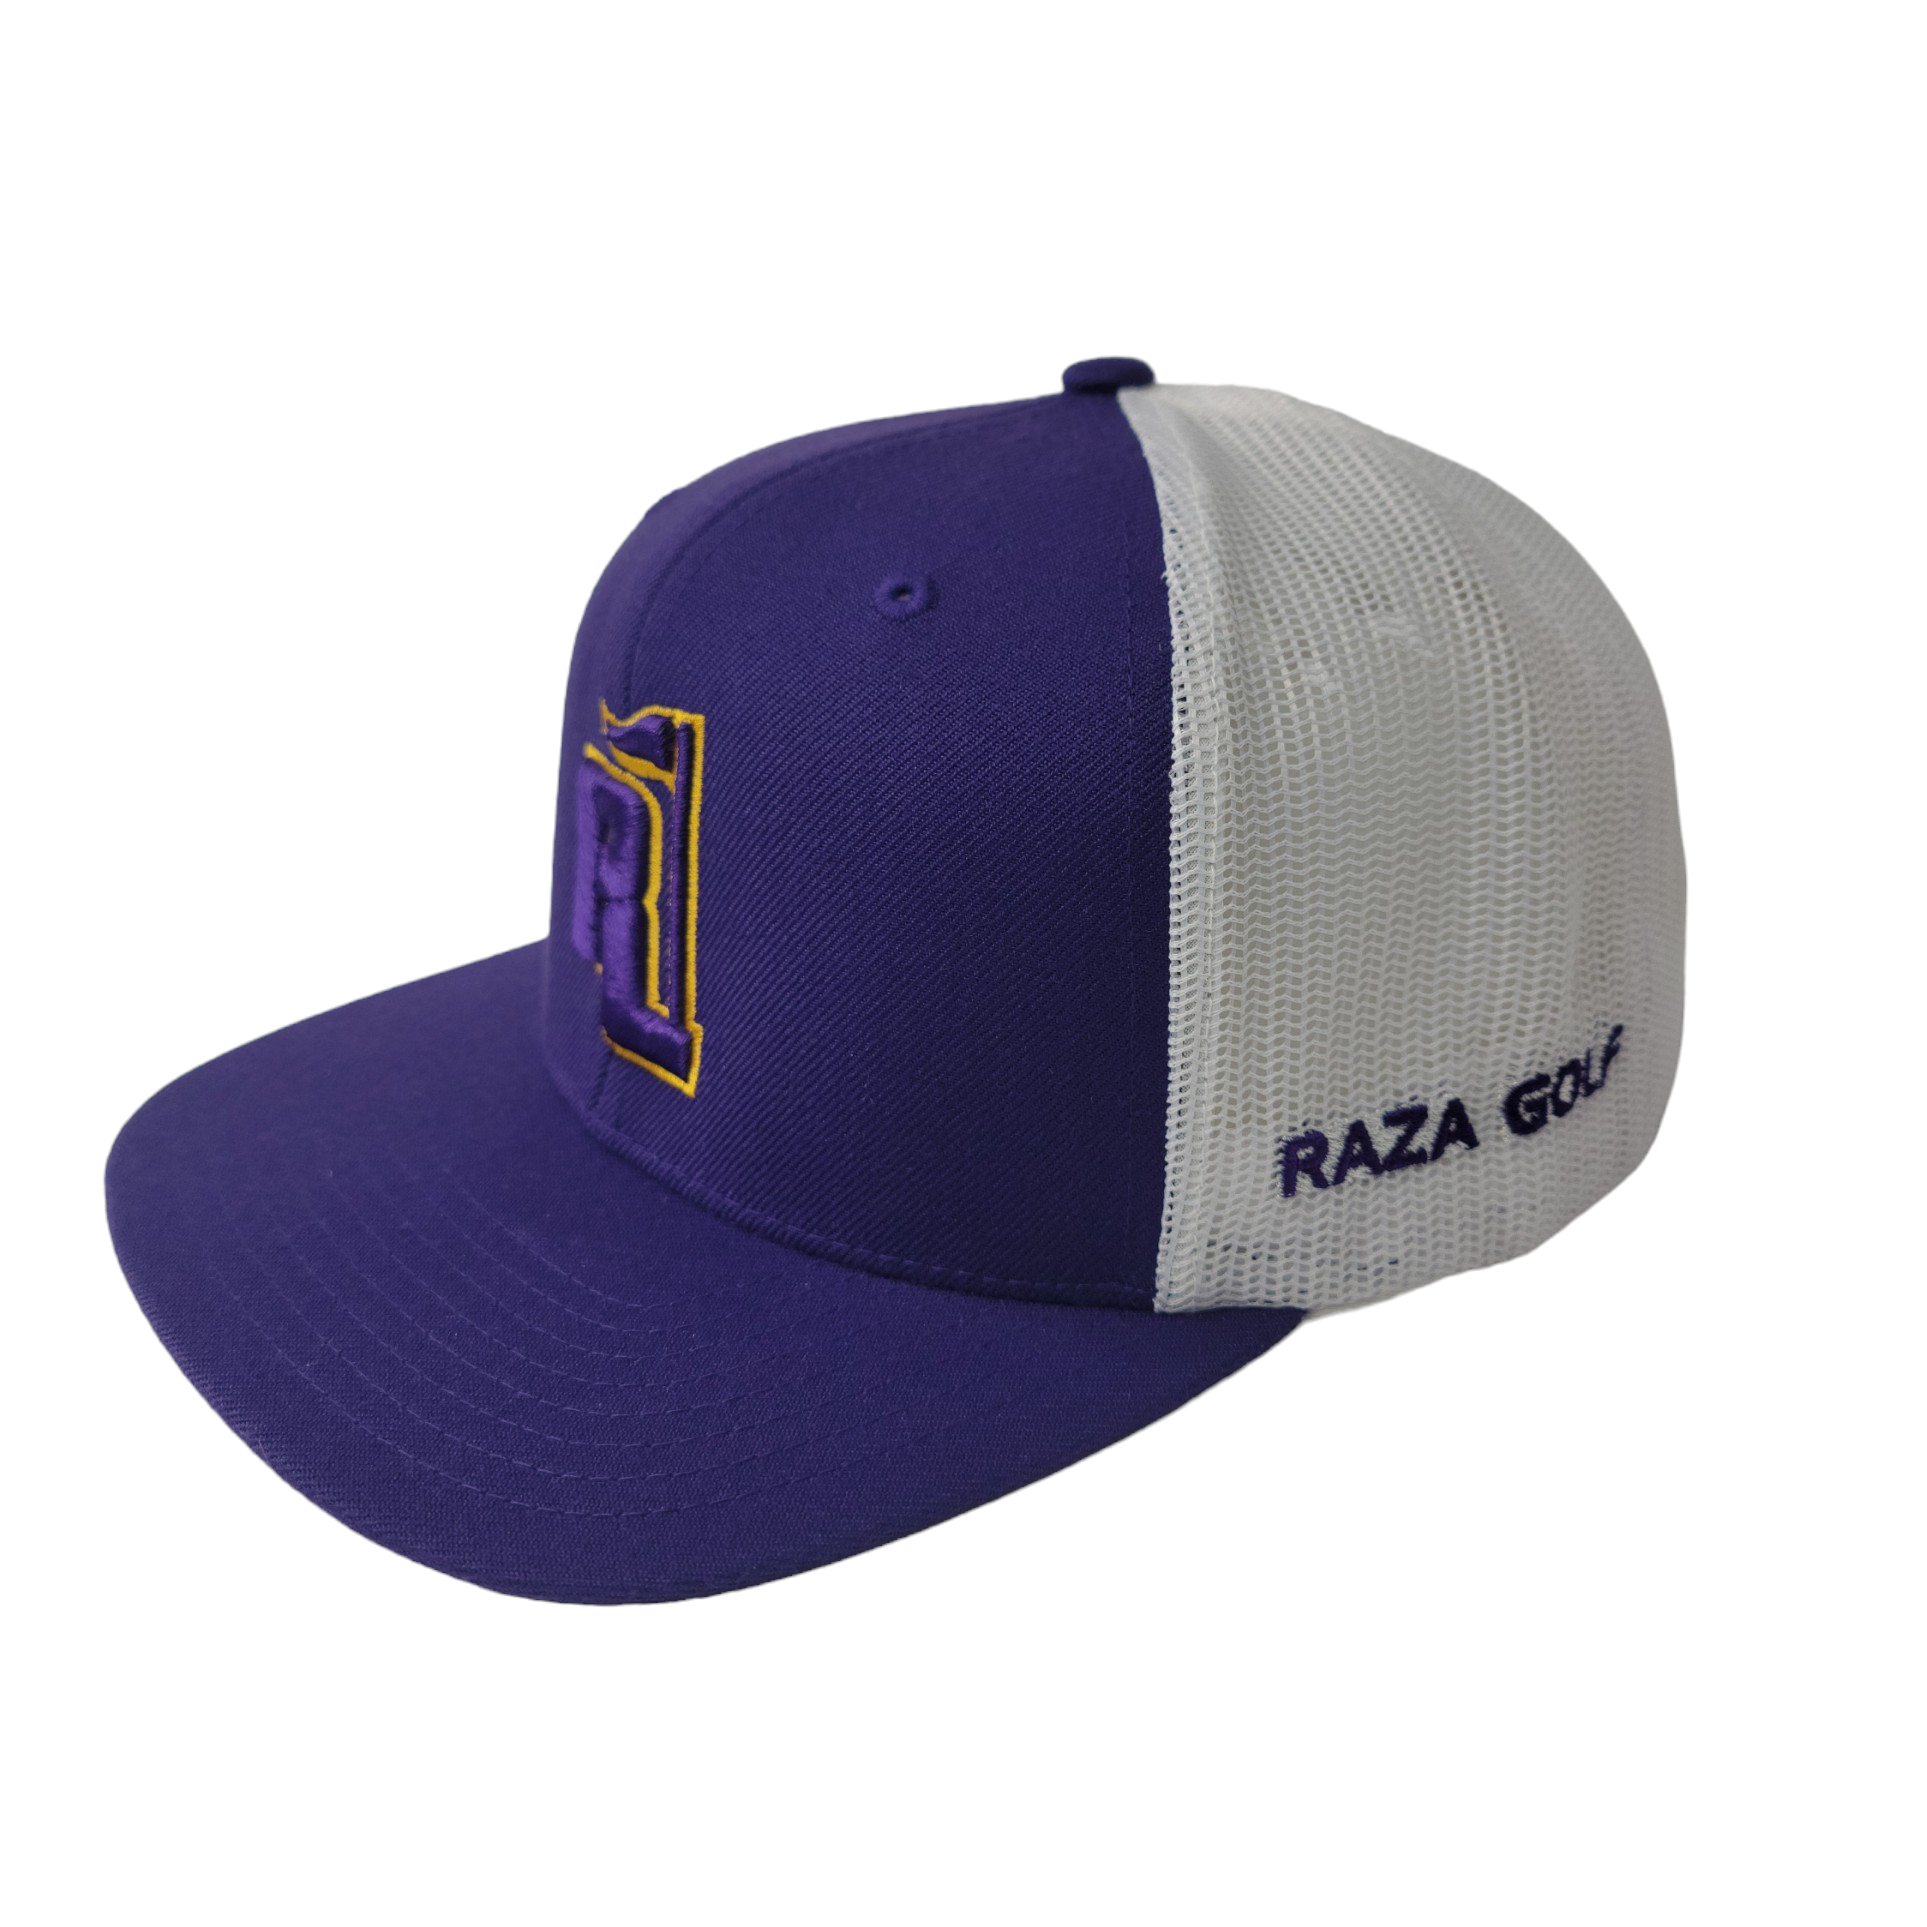 Raza Golf Purple and White Trucker with Purple and Gold Logo